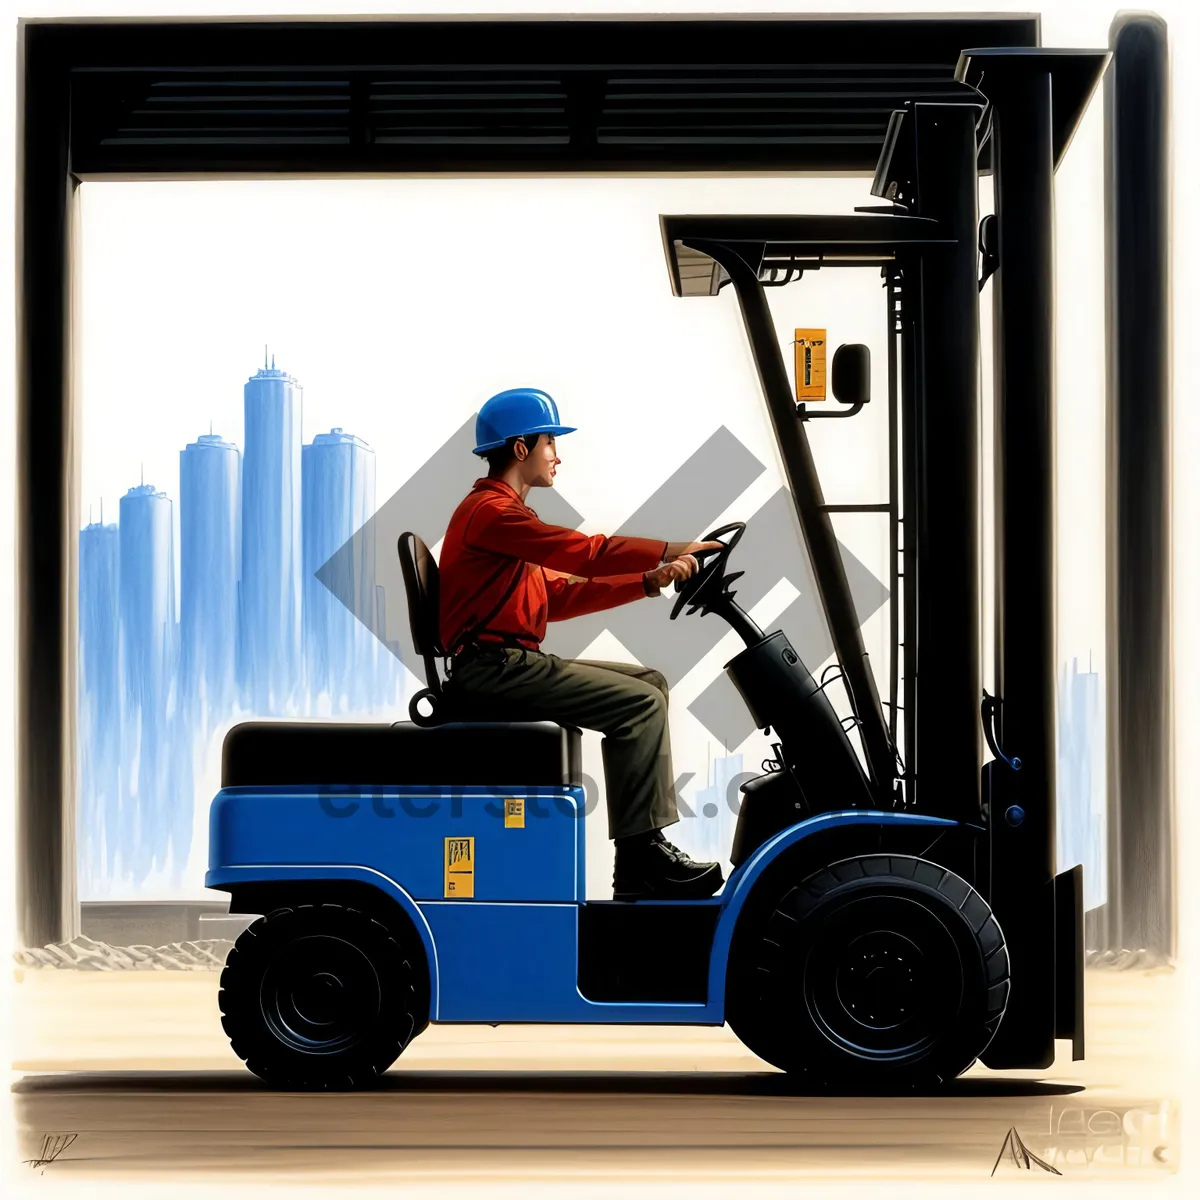 Picture of Efficient Forklift transporting cargo in industrial setting.